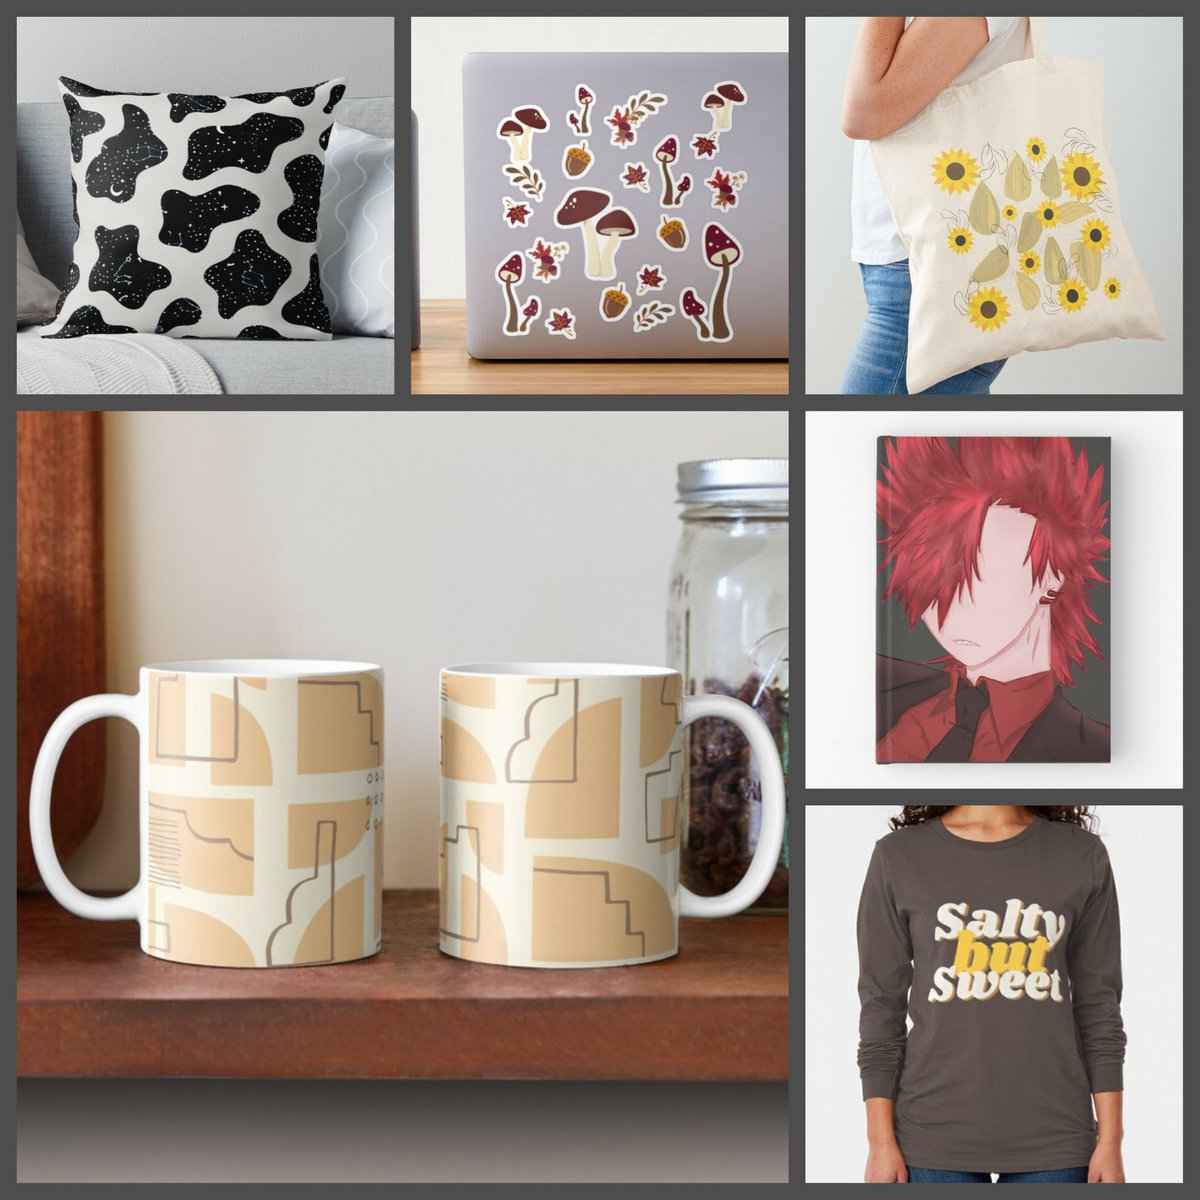 🌟Who wants to be my first sale of the month?🌟 Get my designs printed on prints, stickers, tote bags, mugs, phone cases, home decor, aprons etc! Use code 'SUBSURF15' for 15% off! You can check out phone cases and stickers in the thread below🌸 redbubble.com/people/MarineT…